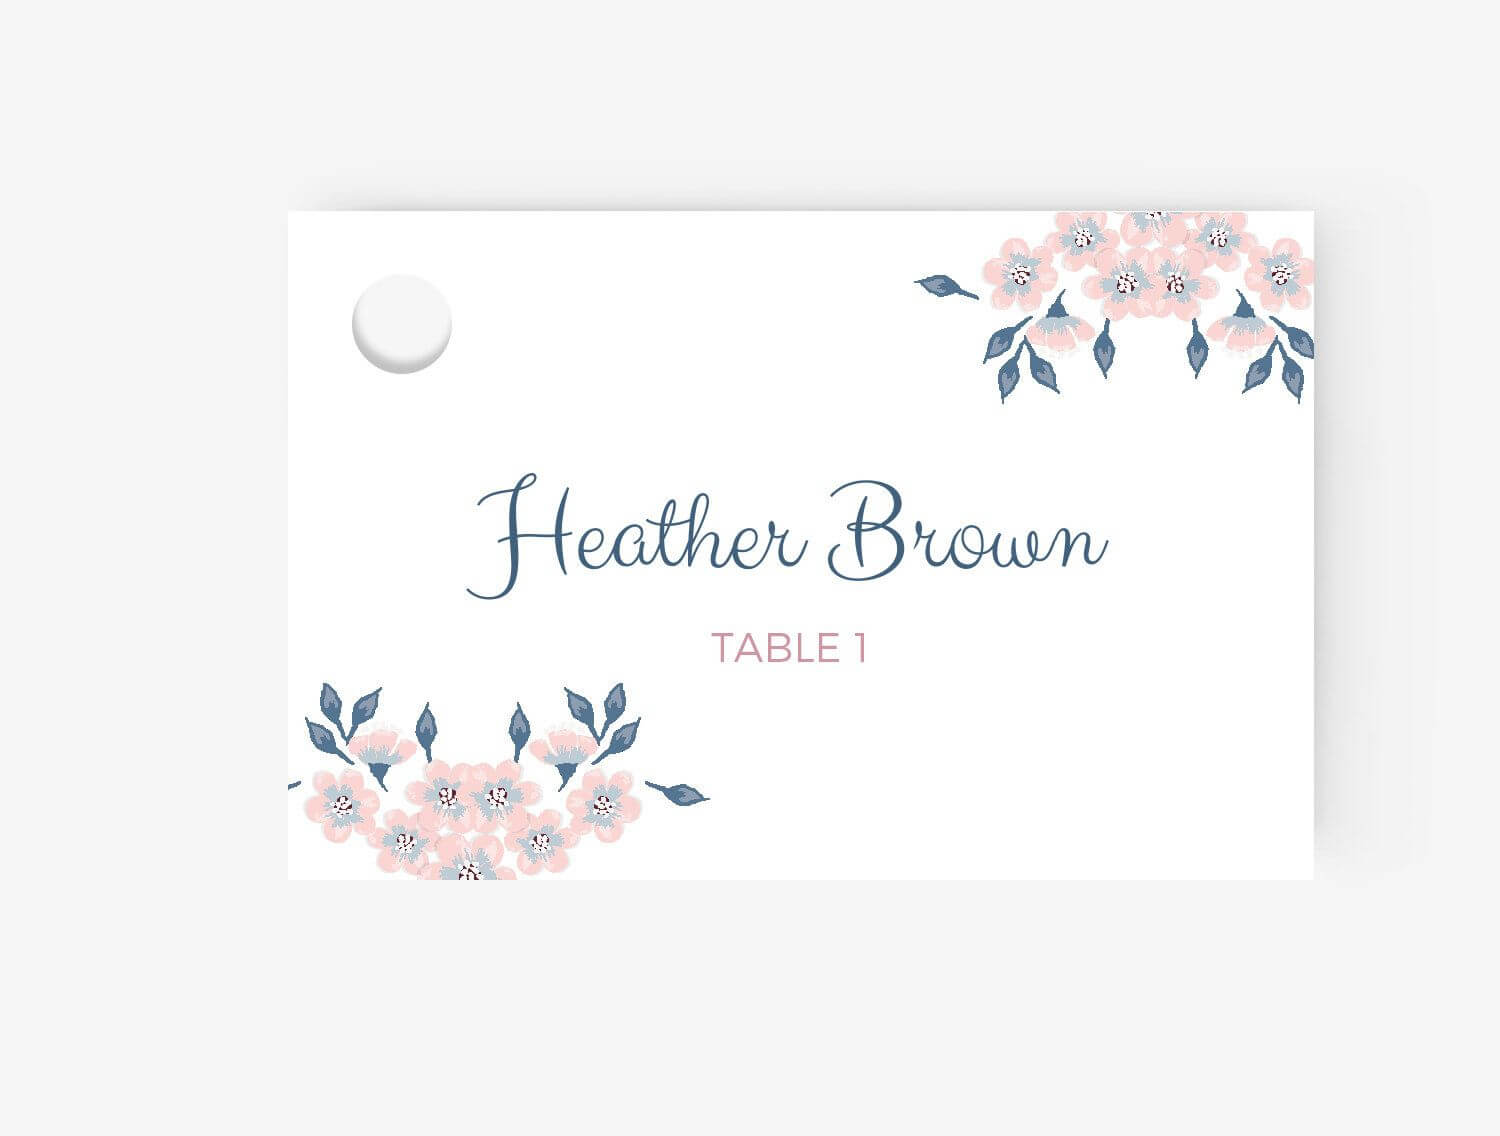 005 Free Place Card Template Ideas Cards Excellent Printable Intended For Free Place Card Templates 6 Per Page